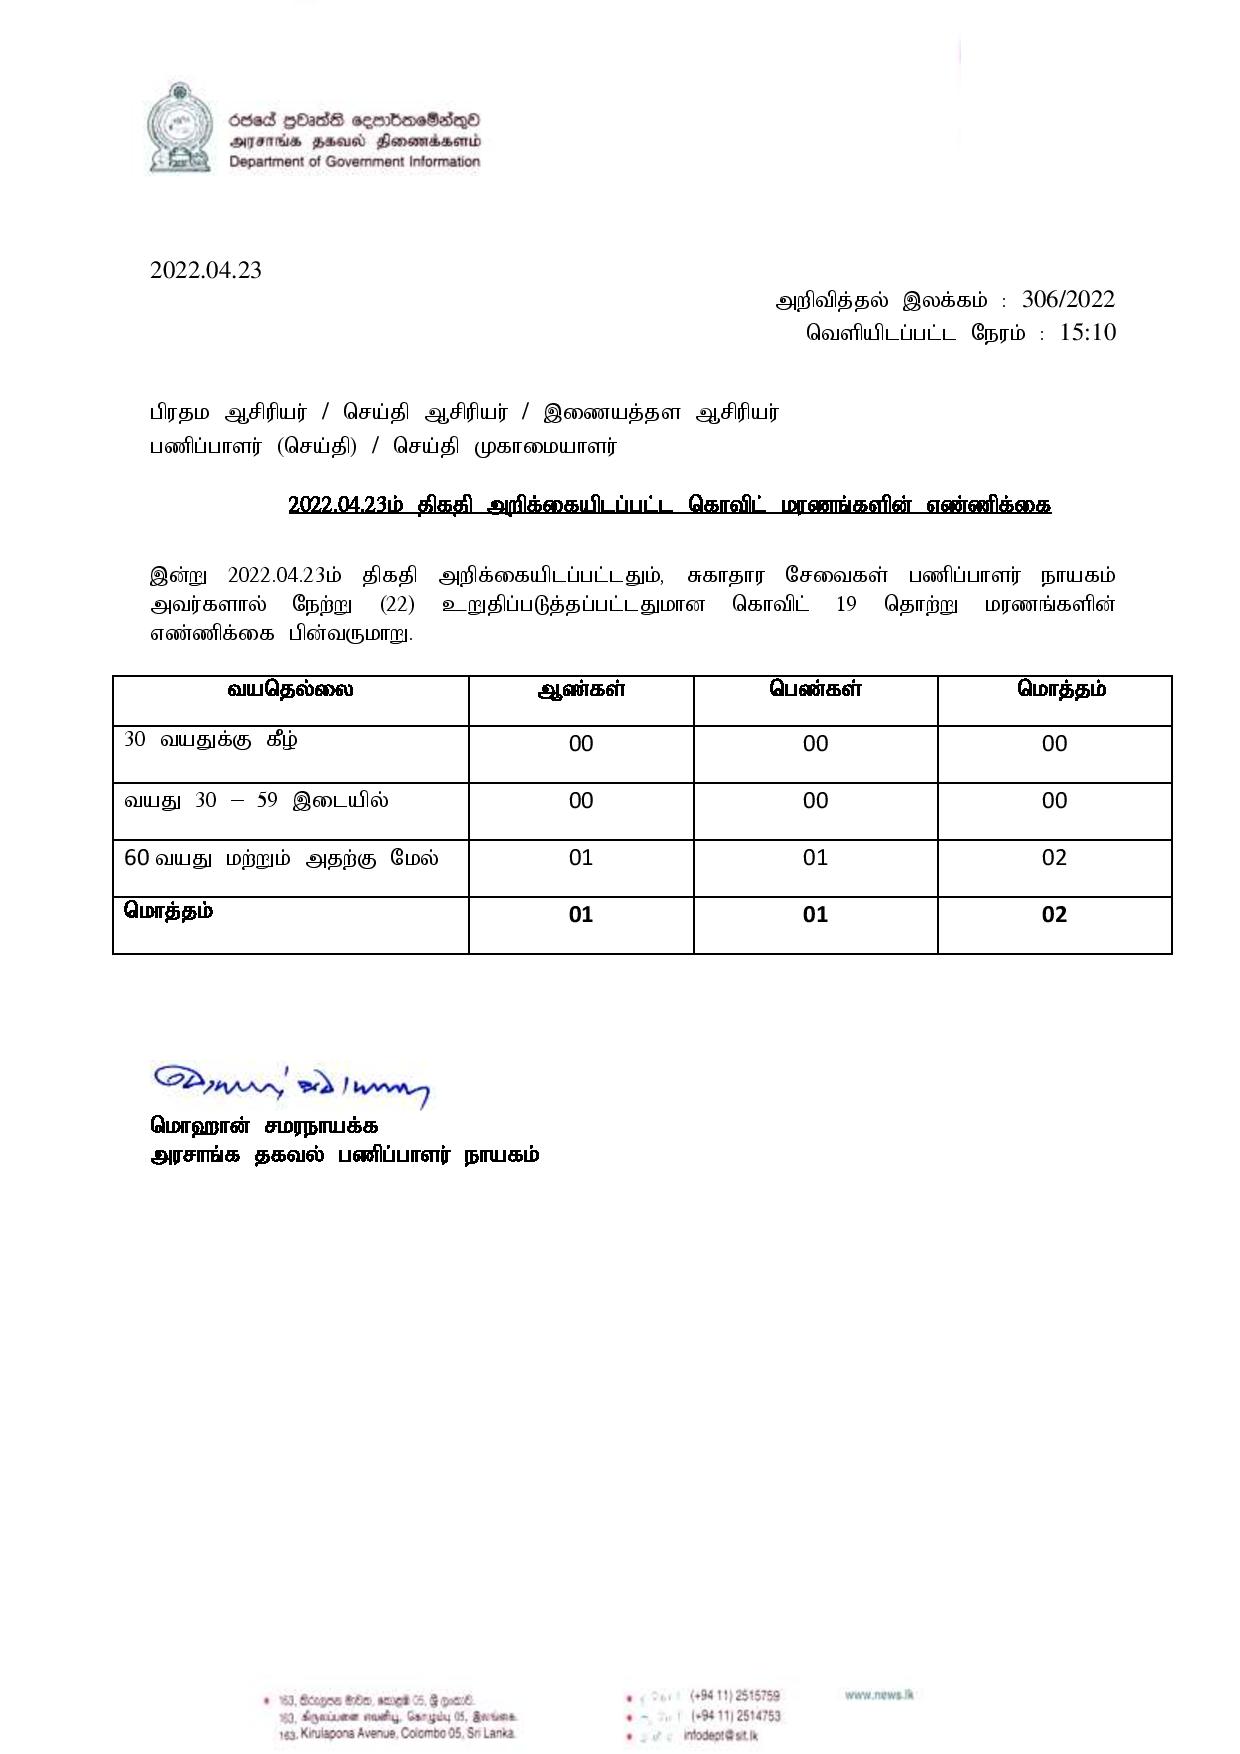 Press Release 306 Tamil page 001